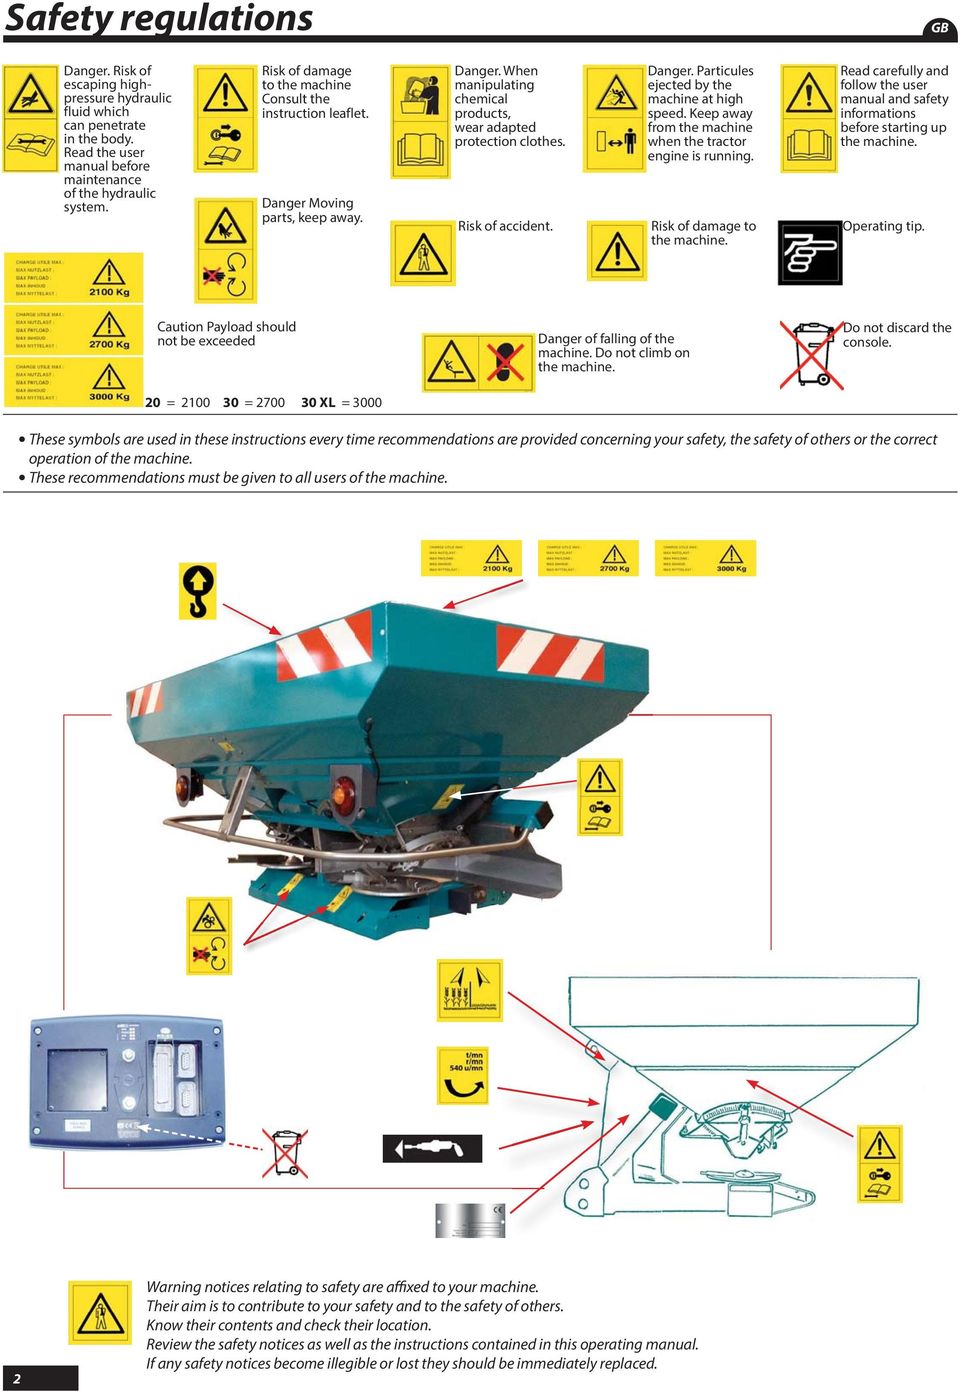 Keep away from the machine when the tractor engine is running. Risk of damage to the machine. Read carefully and follow the user manual and safety informations before starting up the machine.